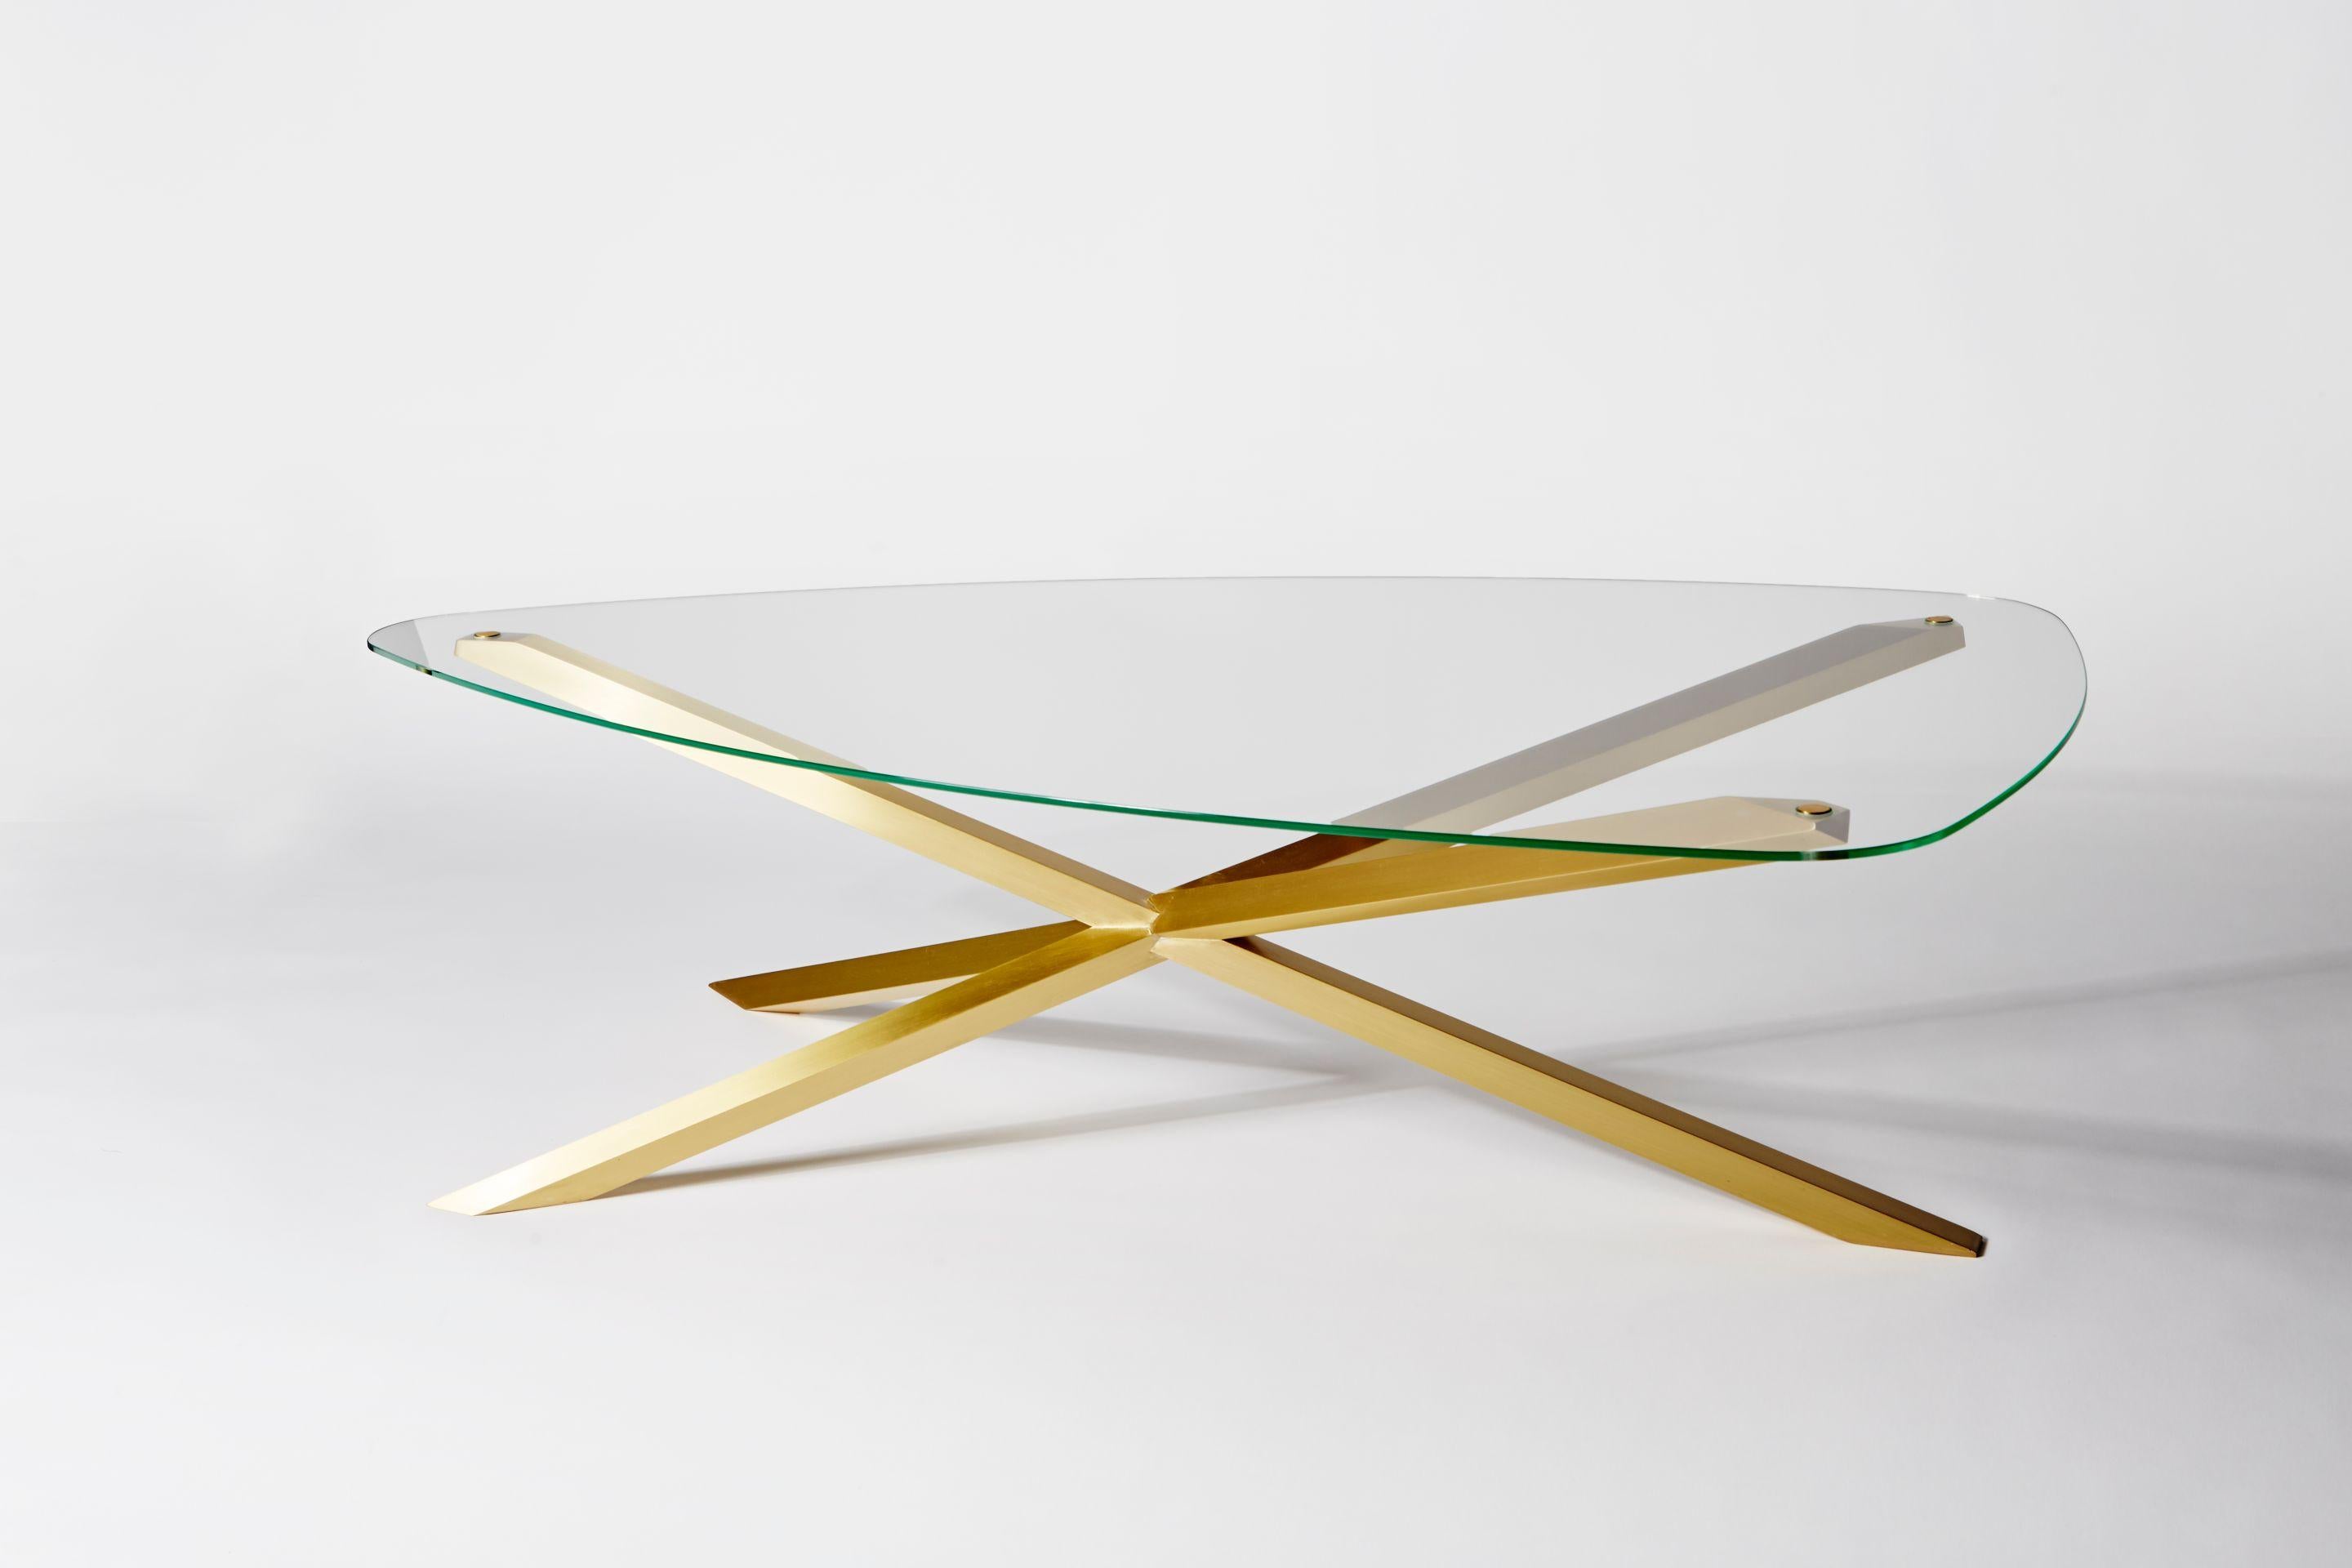 Phasme coffee table by Mydriaz
Dimensions: L 125 x W 60 x H 40 cm
Materials: Brass, glass 
Finishes: Golden-plated or varnished brushed brass, white nickel finish on brushed brass, black nickel finish on brushed brass
34 kg

Our products are